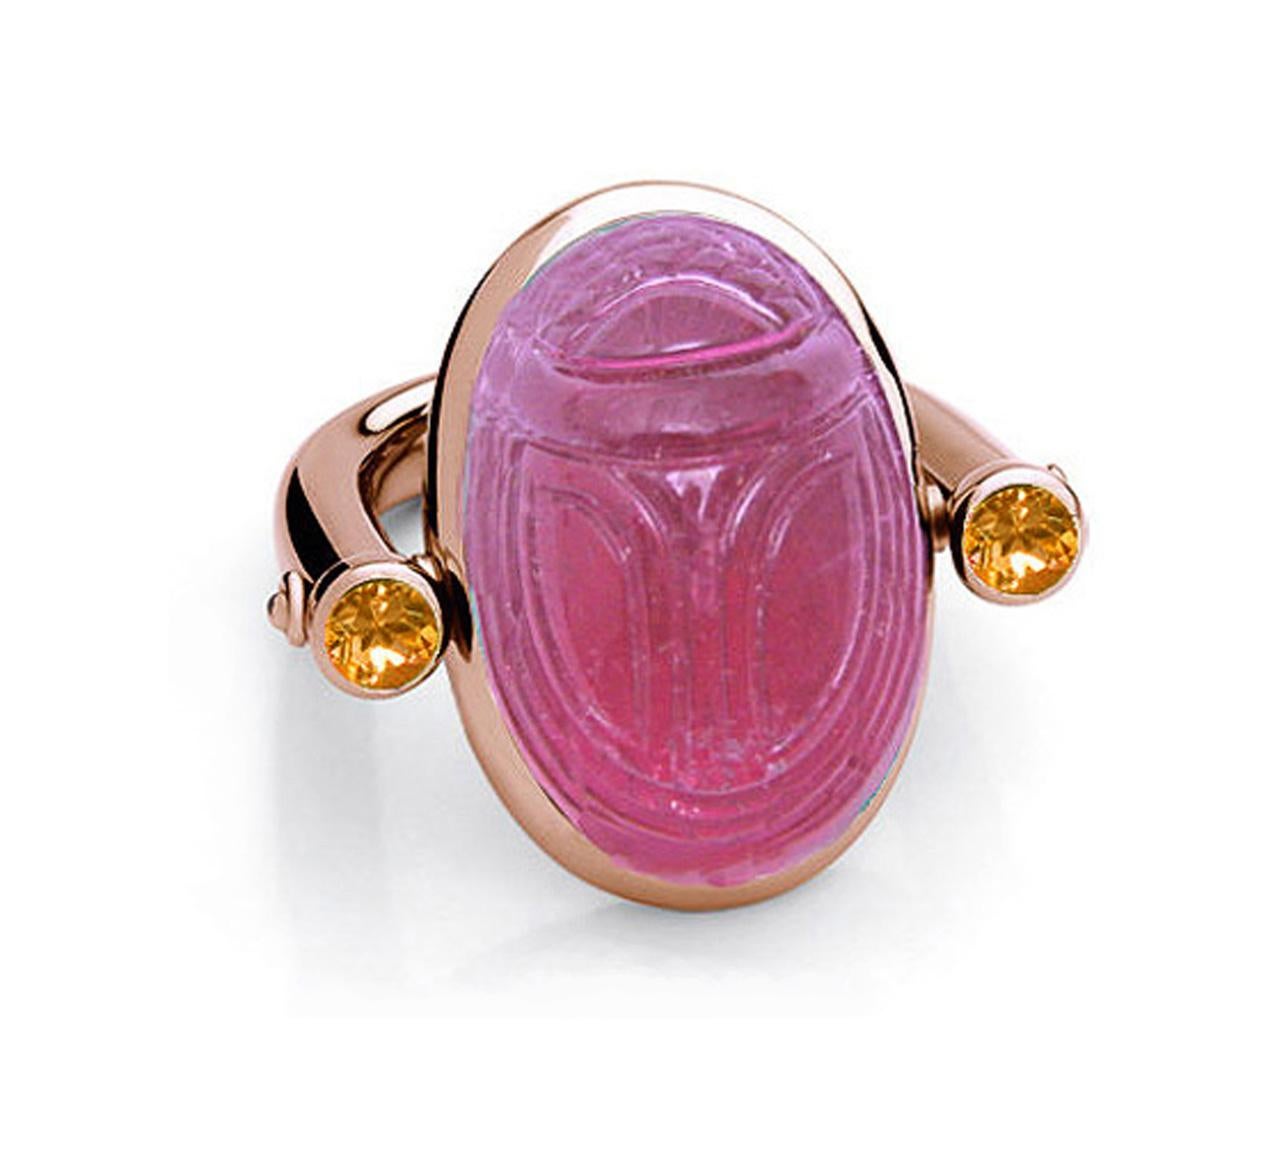 In old Egypt the scarab was a symbol for resurrection and life and since that time a lucky charm for everyone. This desirable ring with one rubelite 30,58 ct and two orange sapphires 0.77 ct could be your personal lucky charm.